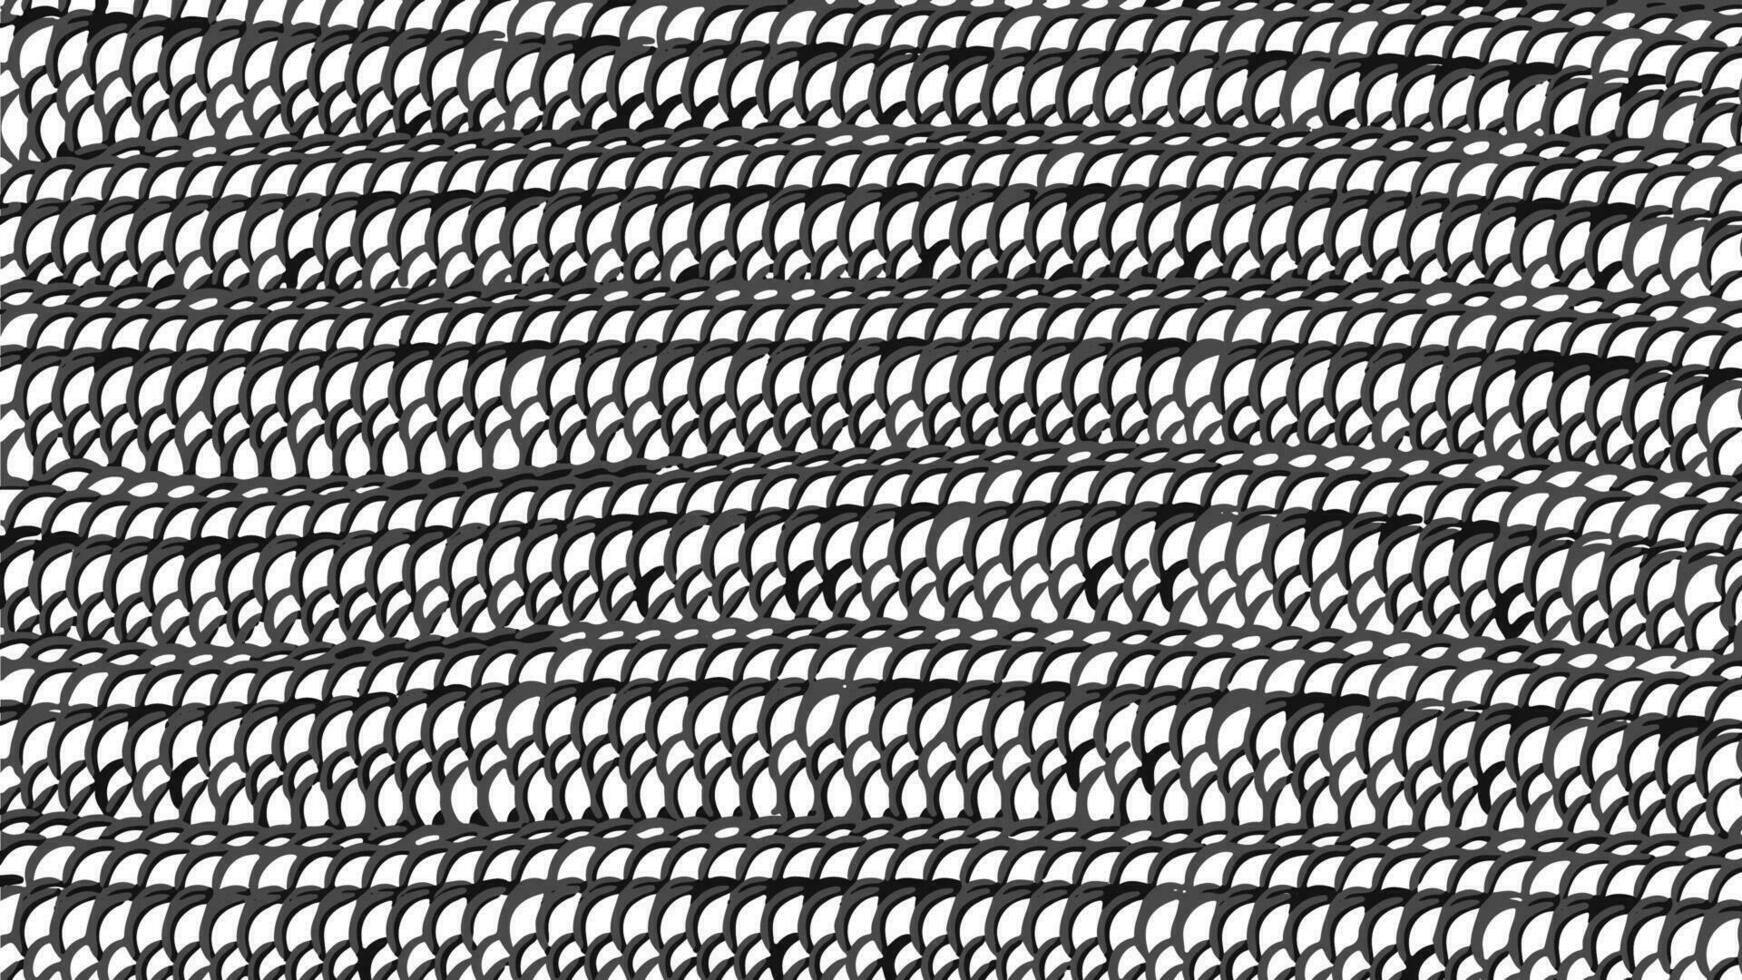 Snake scale pattern. Chainmail. Reptile skin texture. Abstract geometric background. Scale rings, mesh. Monochrome black and white ornament. Vector. For design, print, fabric, textile vector